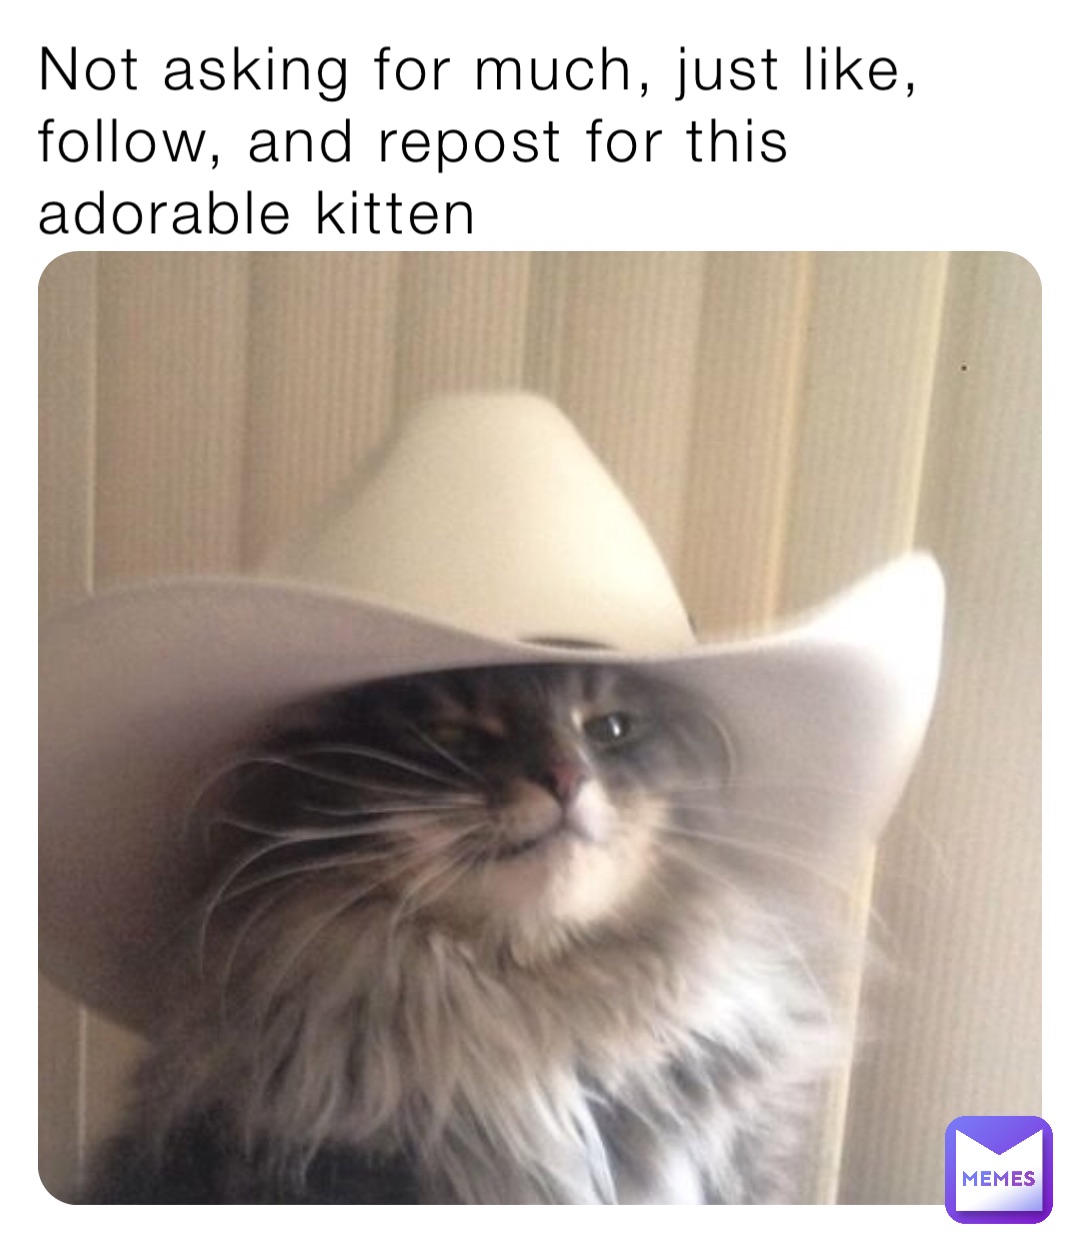 Not asking for much, just like, follow, and repost for this adorable kitten